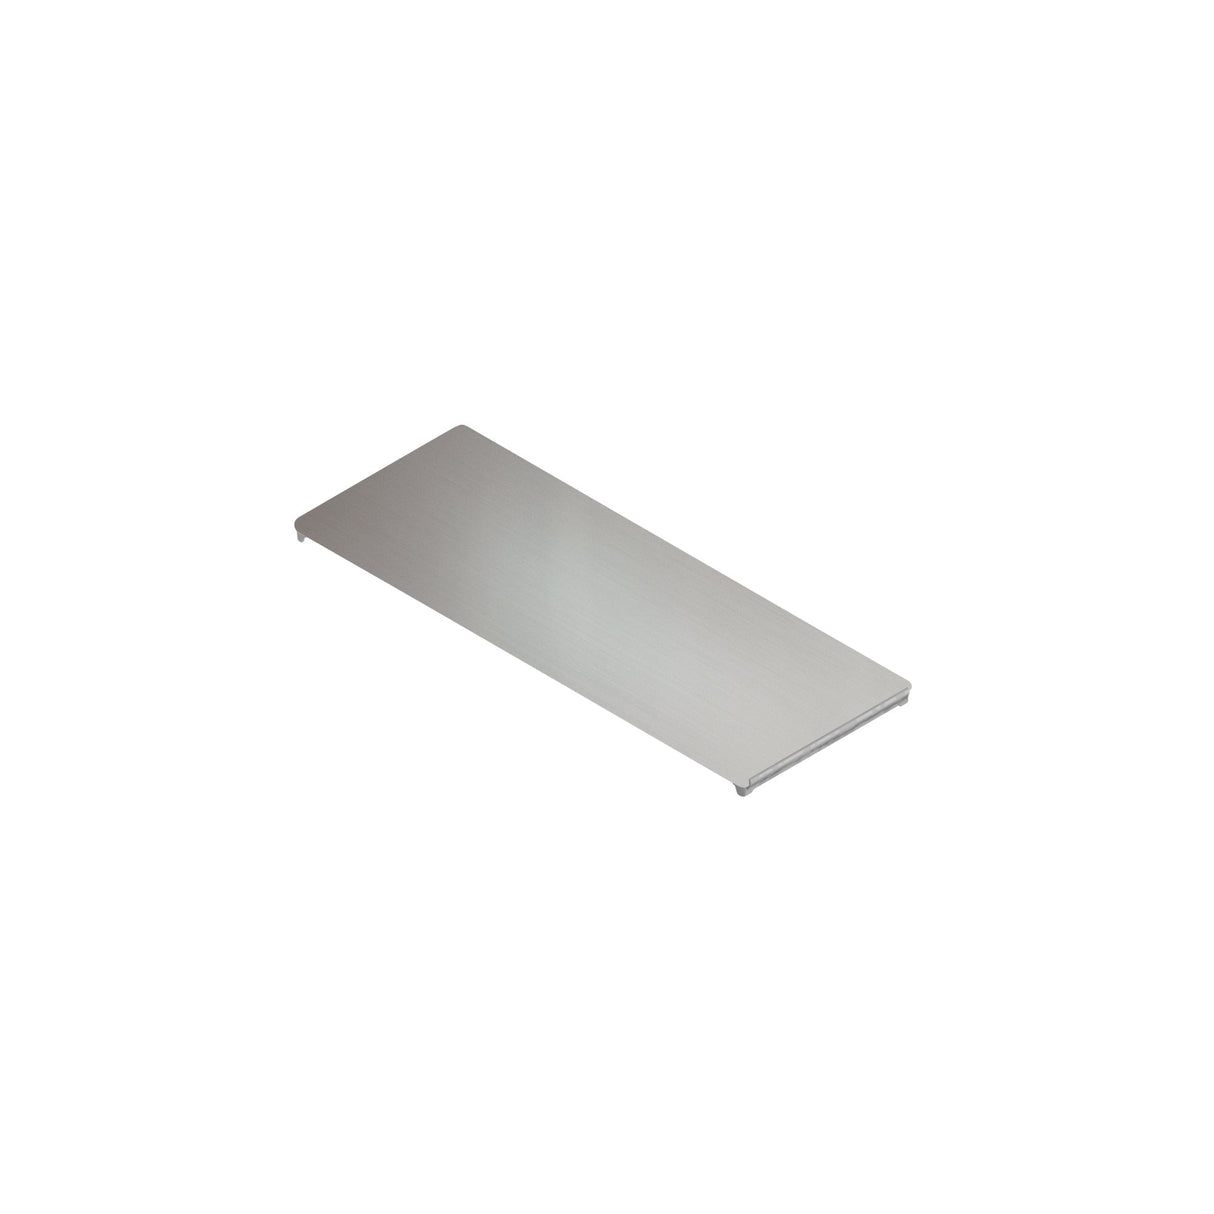 FRANKE CL-SSC Crystal Replacement Drain Cover In Stainless